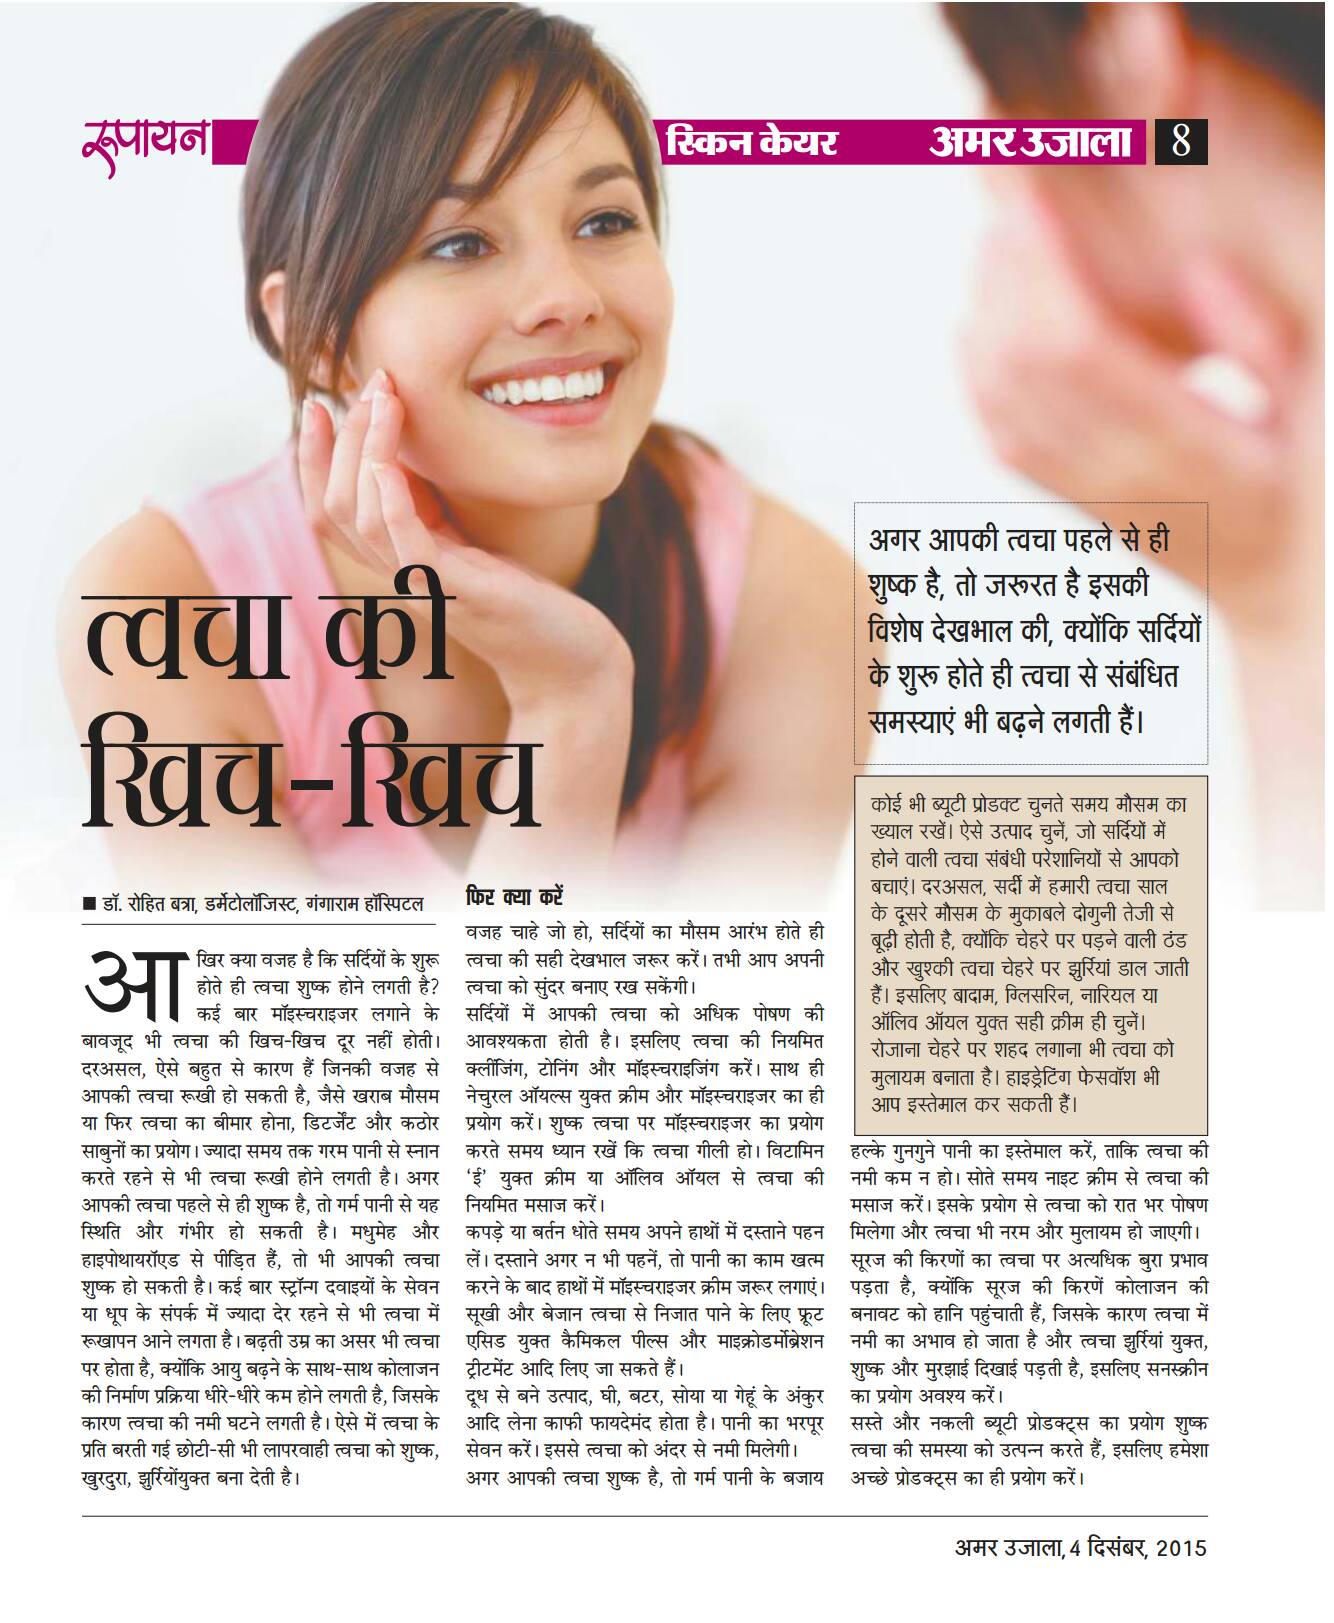 Dr Rohit Batra' inputs in today's Amar Ujala